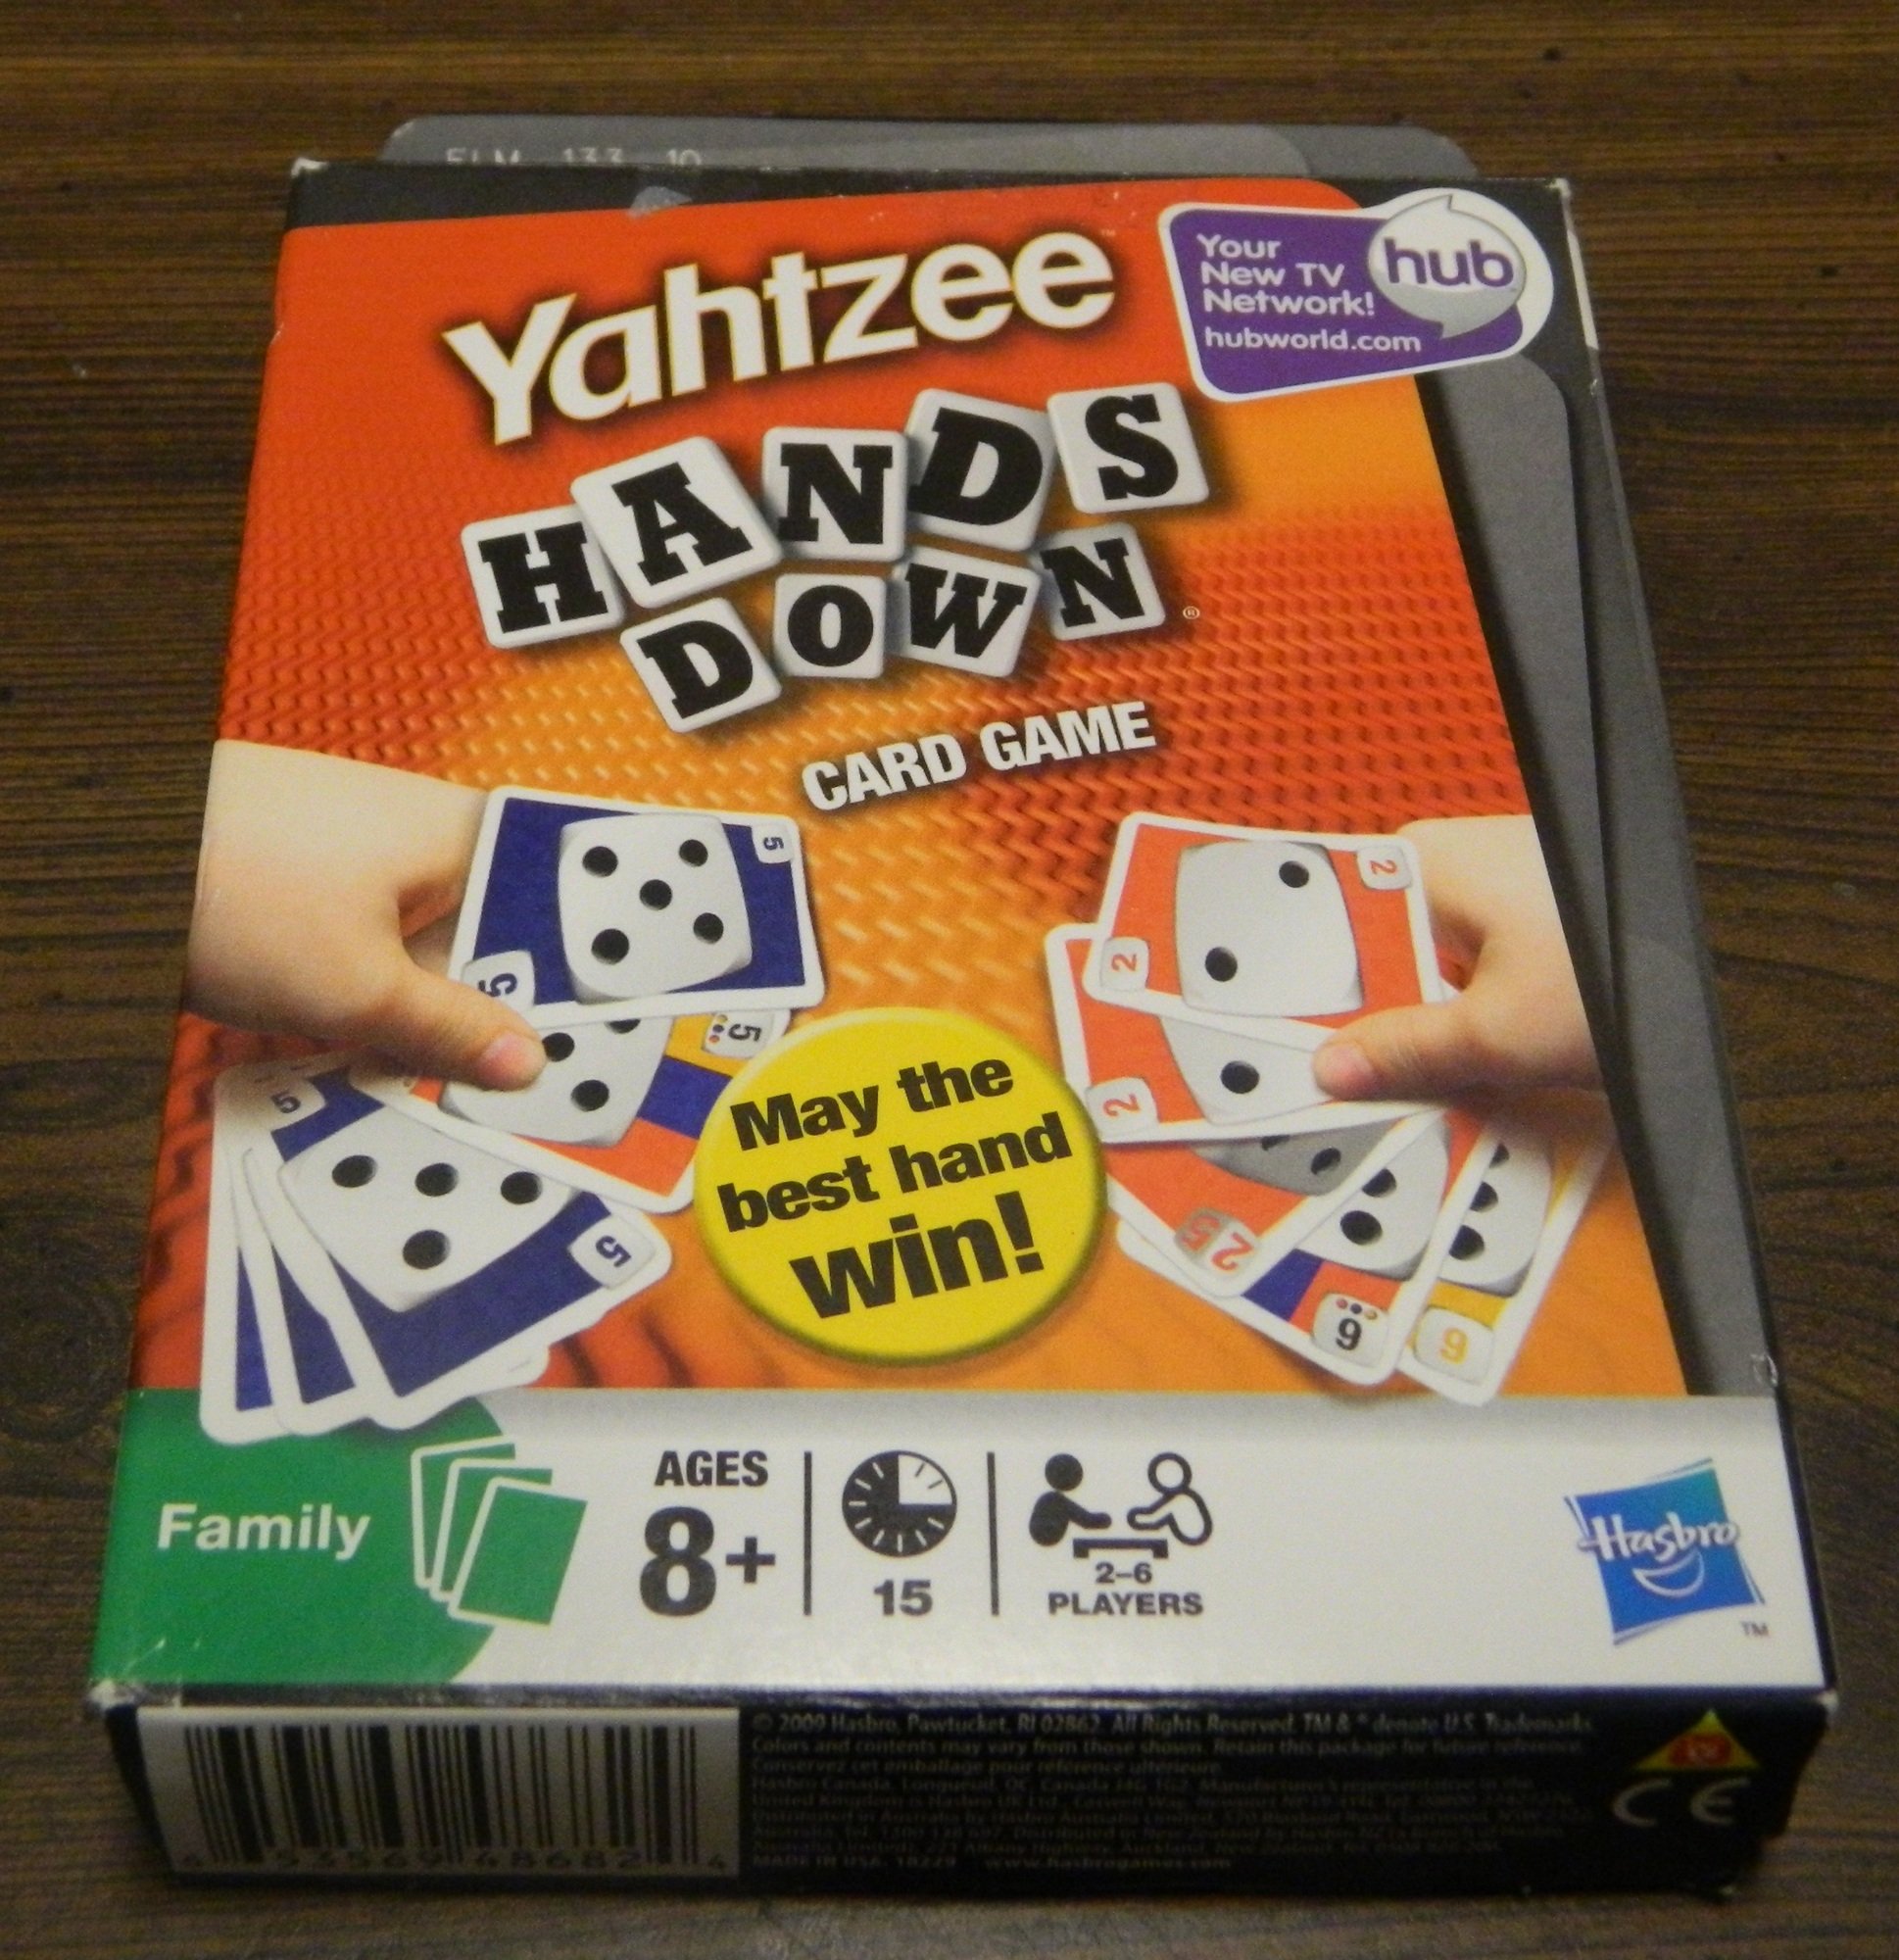 Yahtzee Hands Down Card Game Review and Rules - Geeky Hobbies